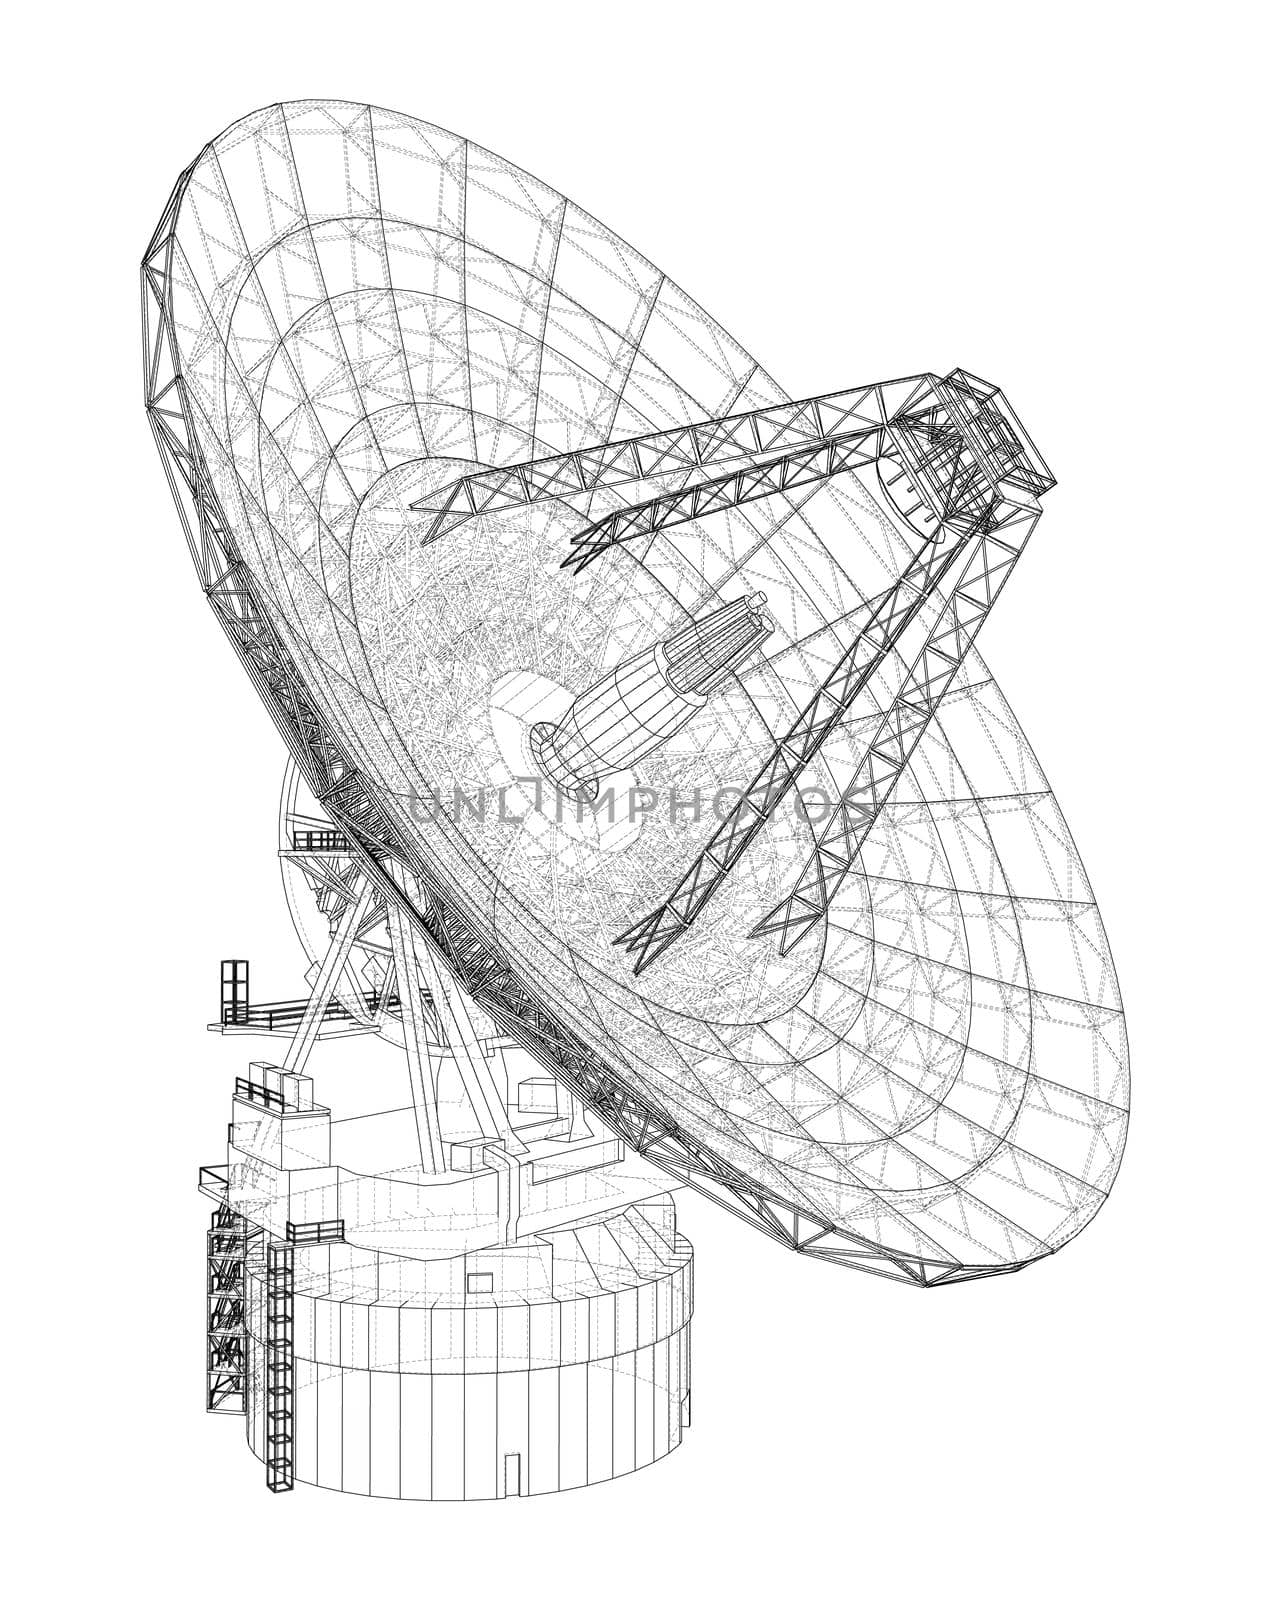 Radio Telescope concept outline. 3d illustration. Wire-frame style